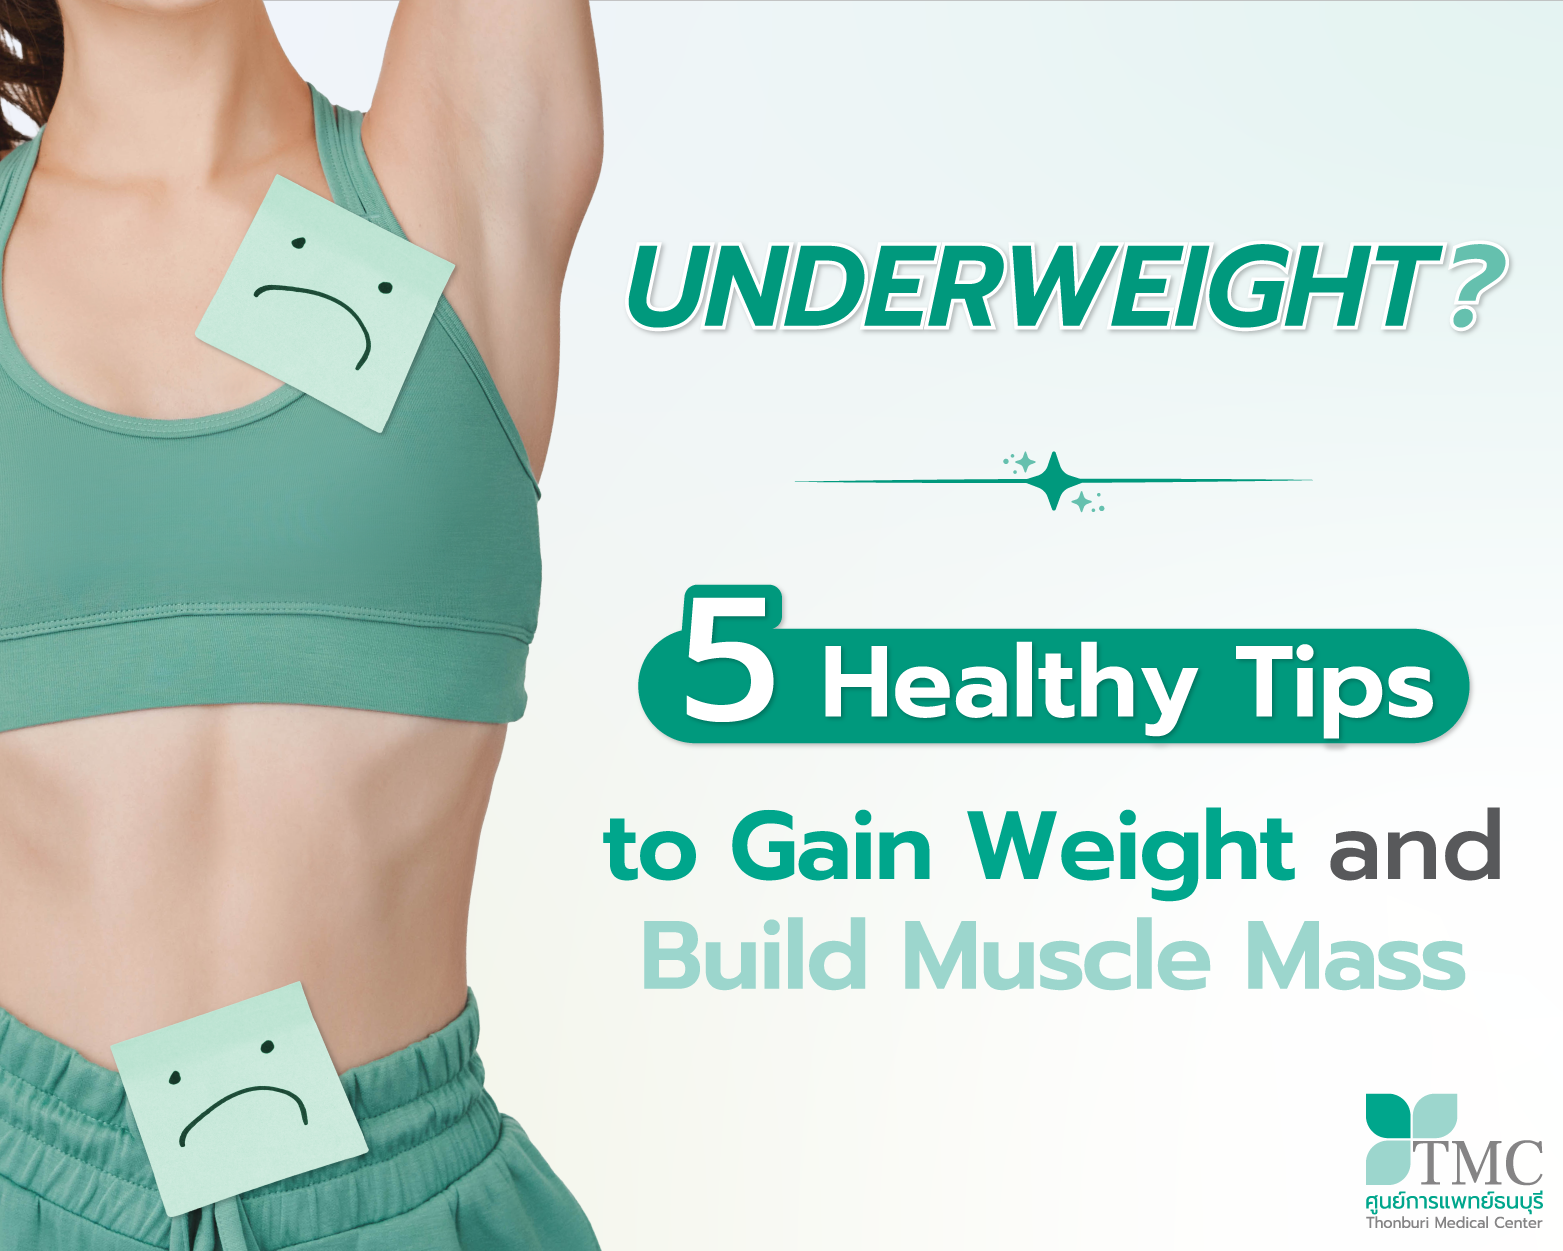 Underweight? 5 healthy tips to gain weight and build muscle mass.